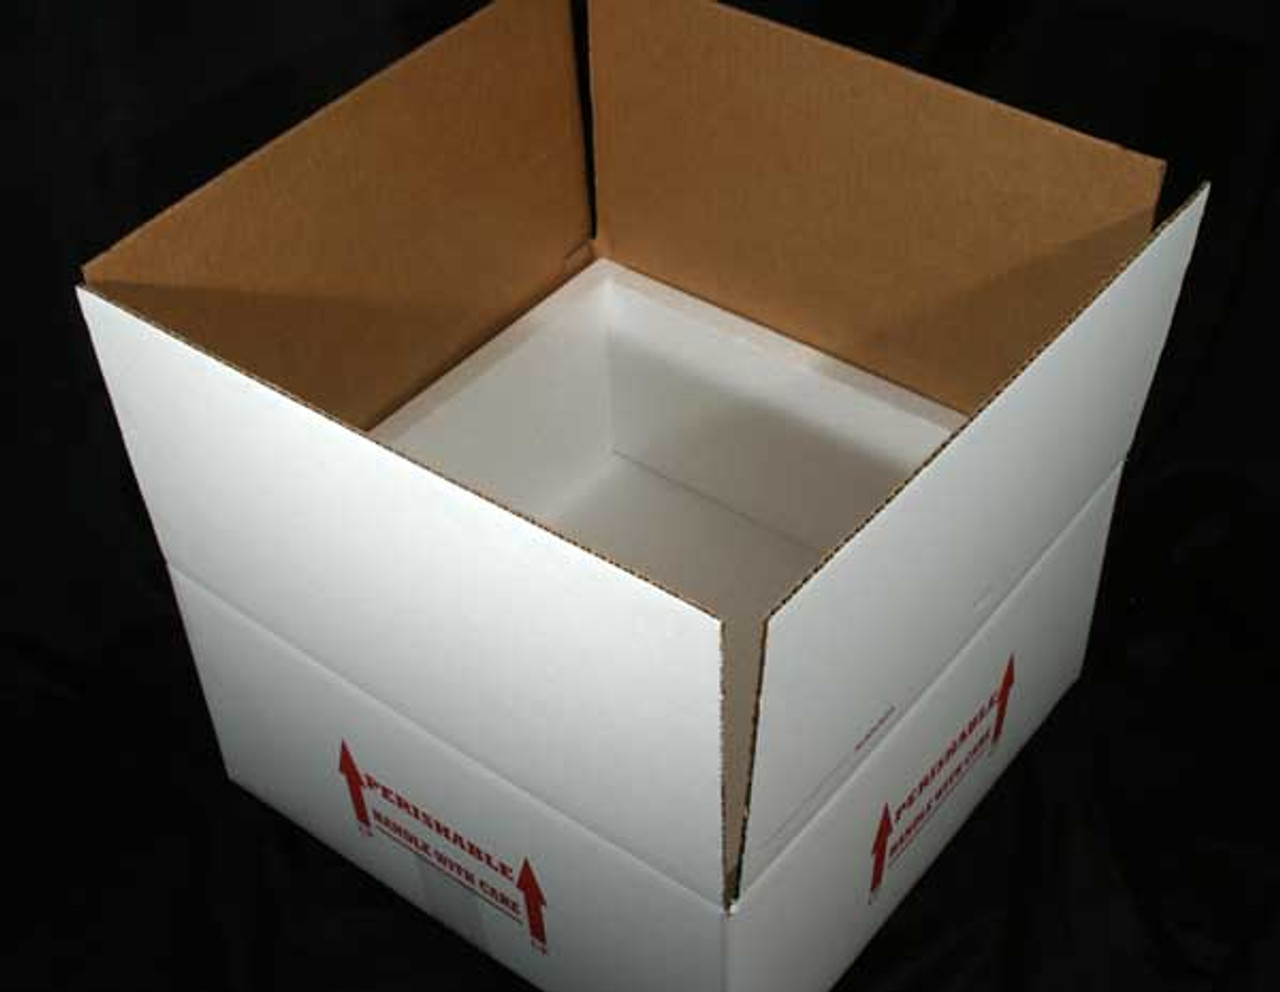 16 X 16 X 8  Insulated Shipping Box with 3/4" Foam 5 Pack